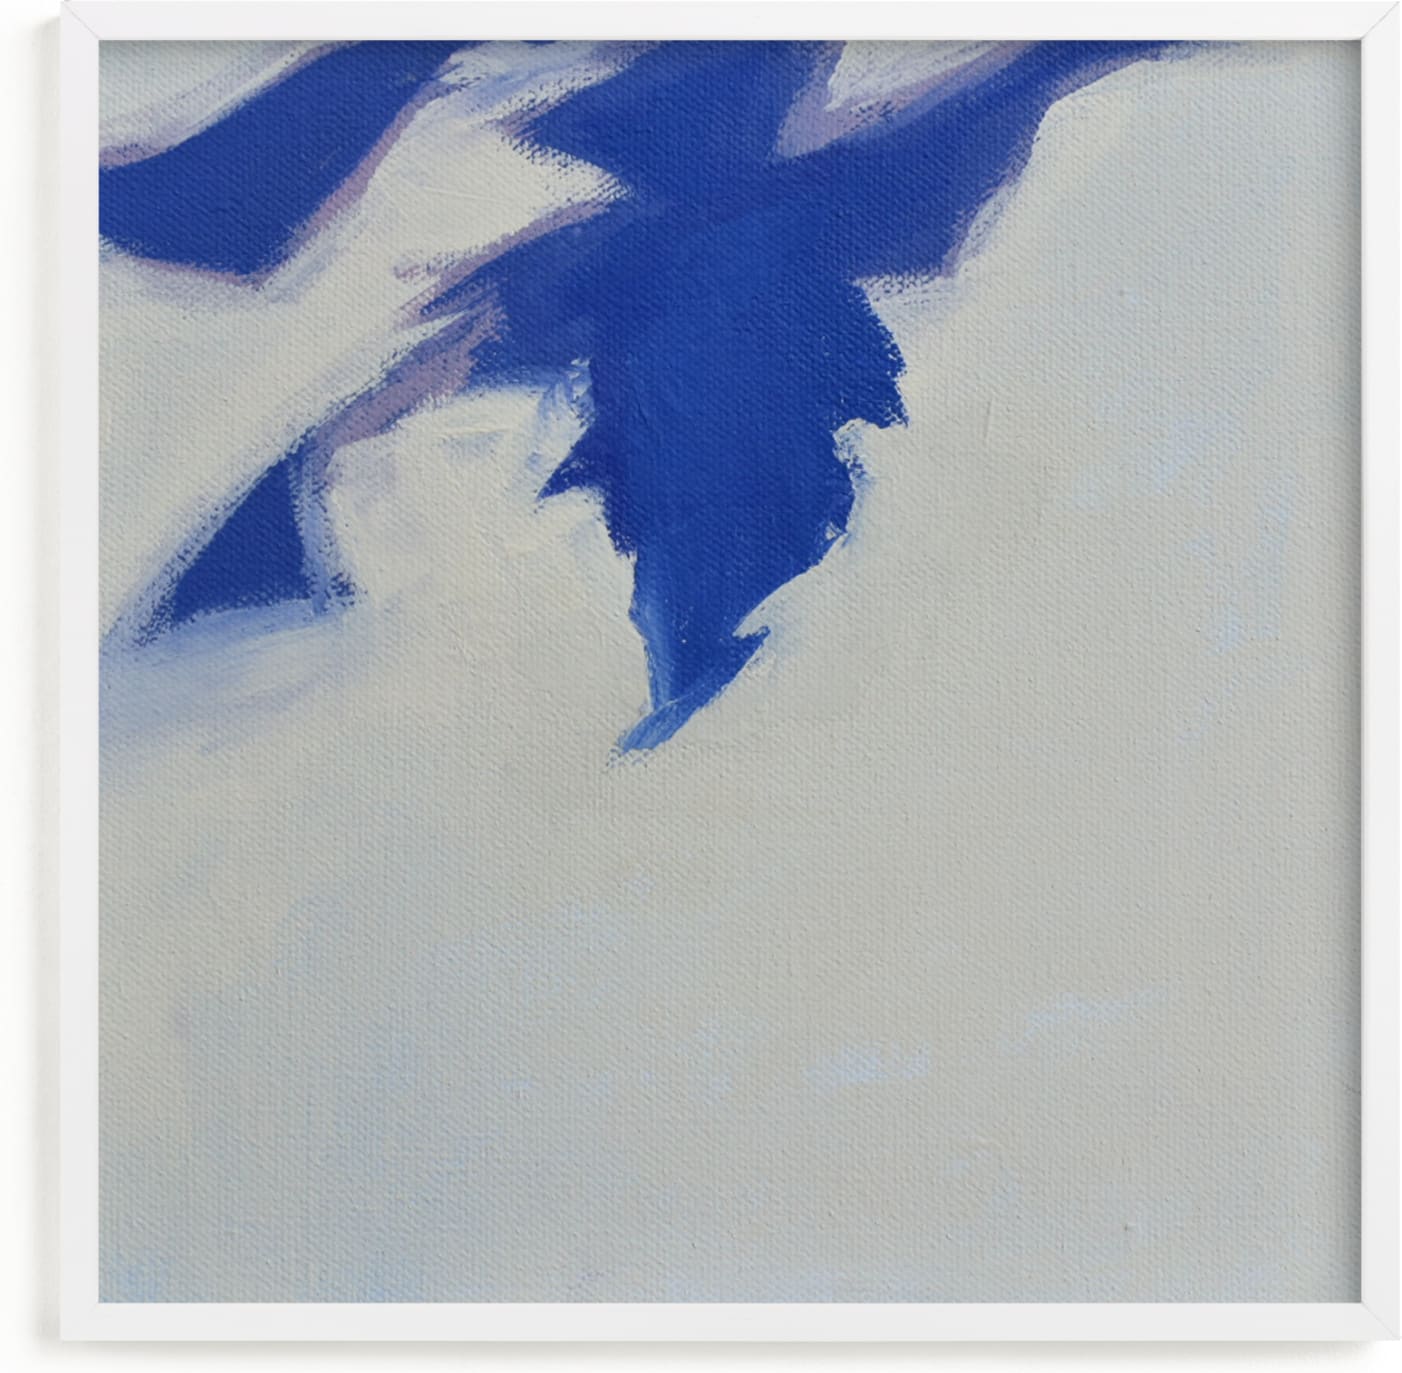 This is a blue art by Katie Analise called Leaf Shadows II.